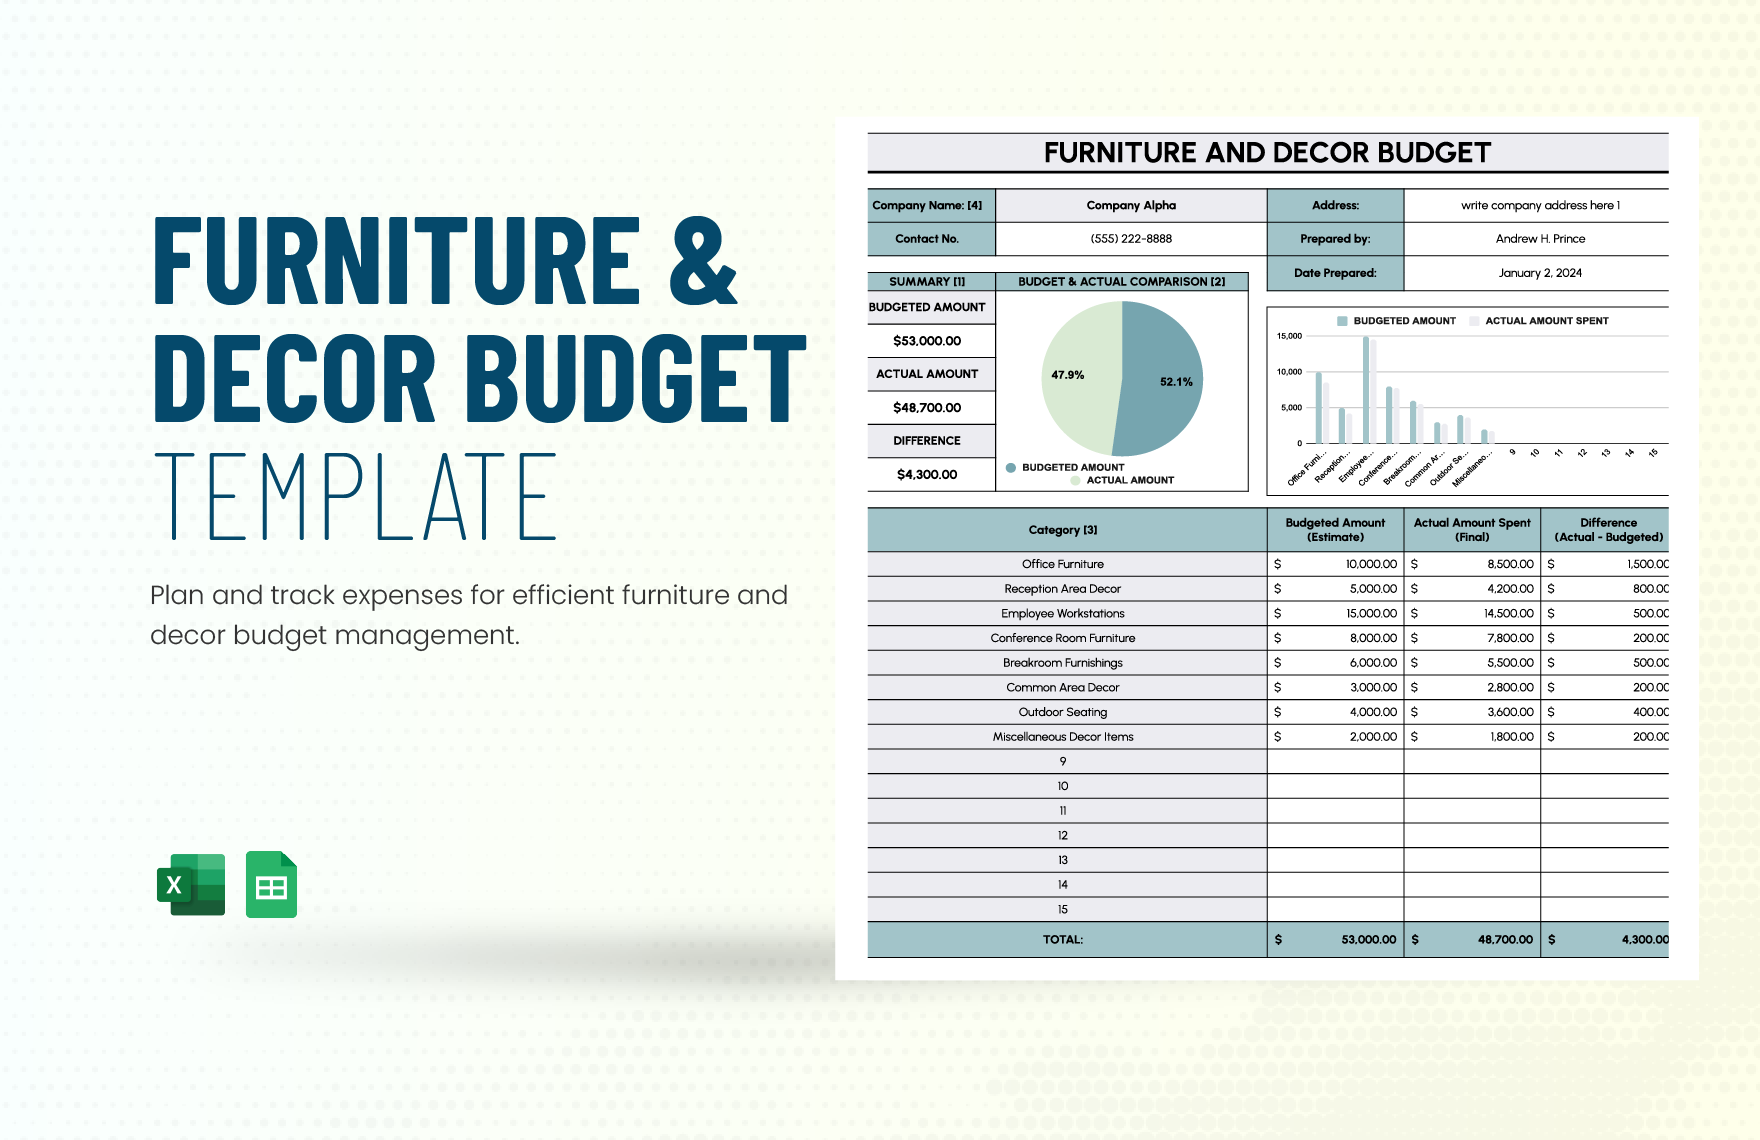 Furniture and Decor Budget Template